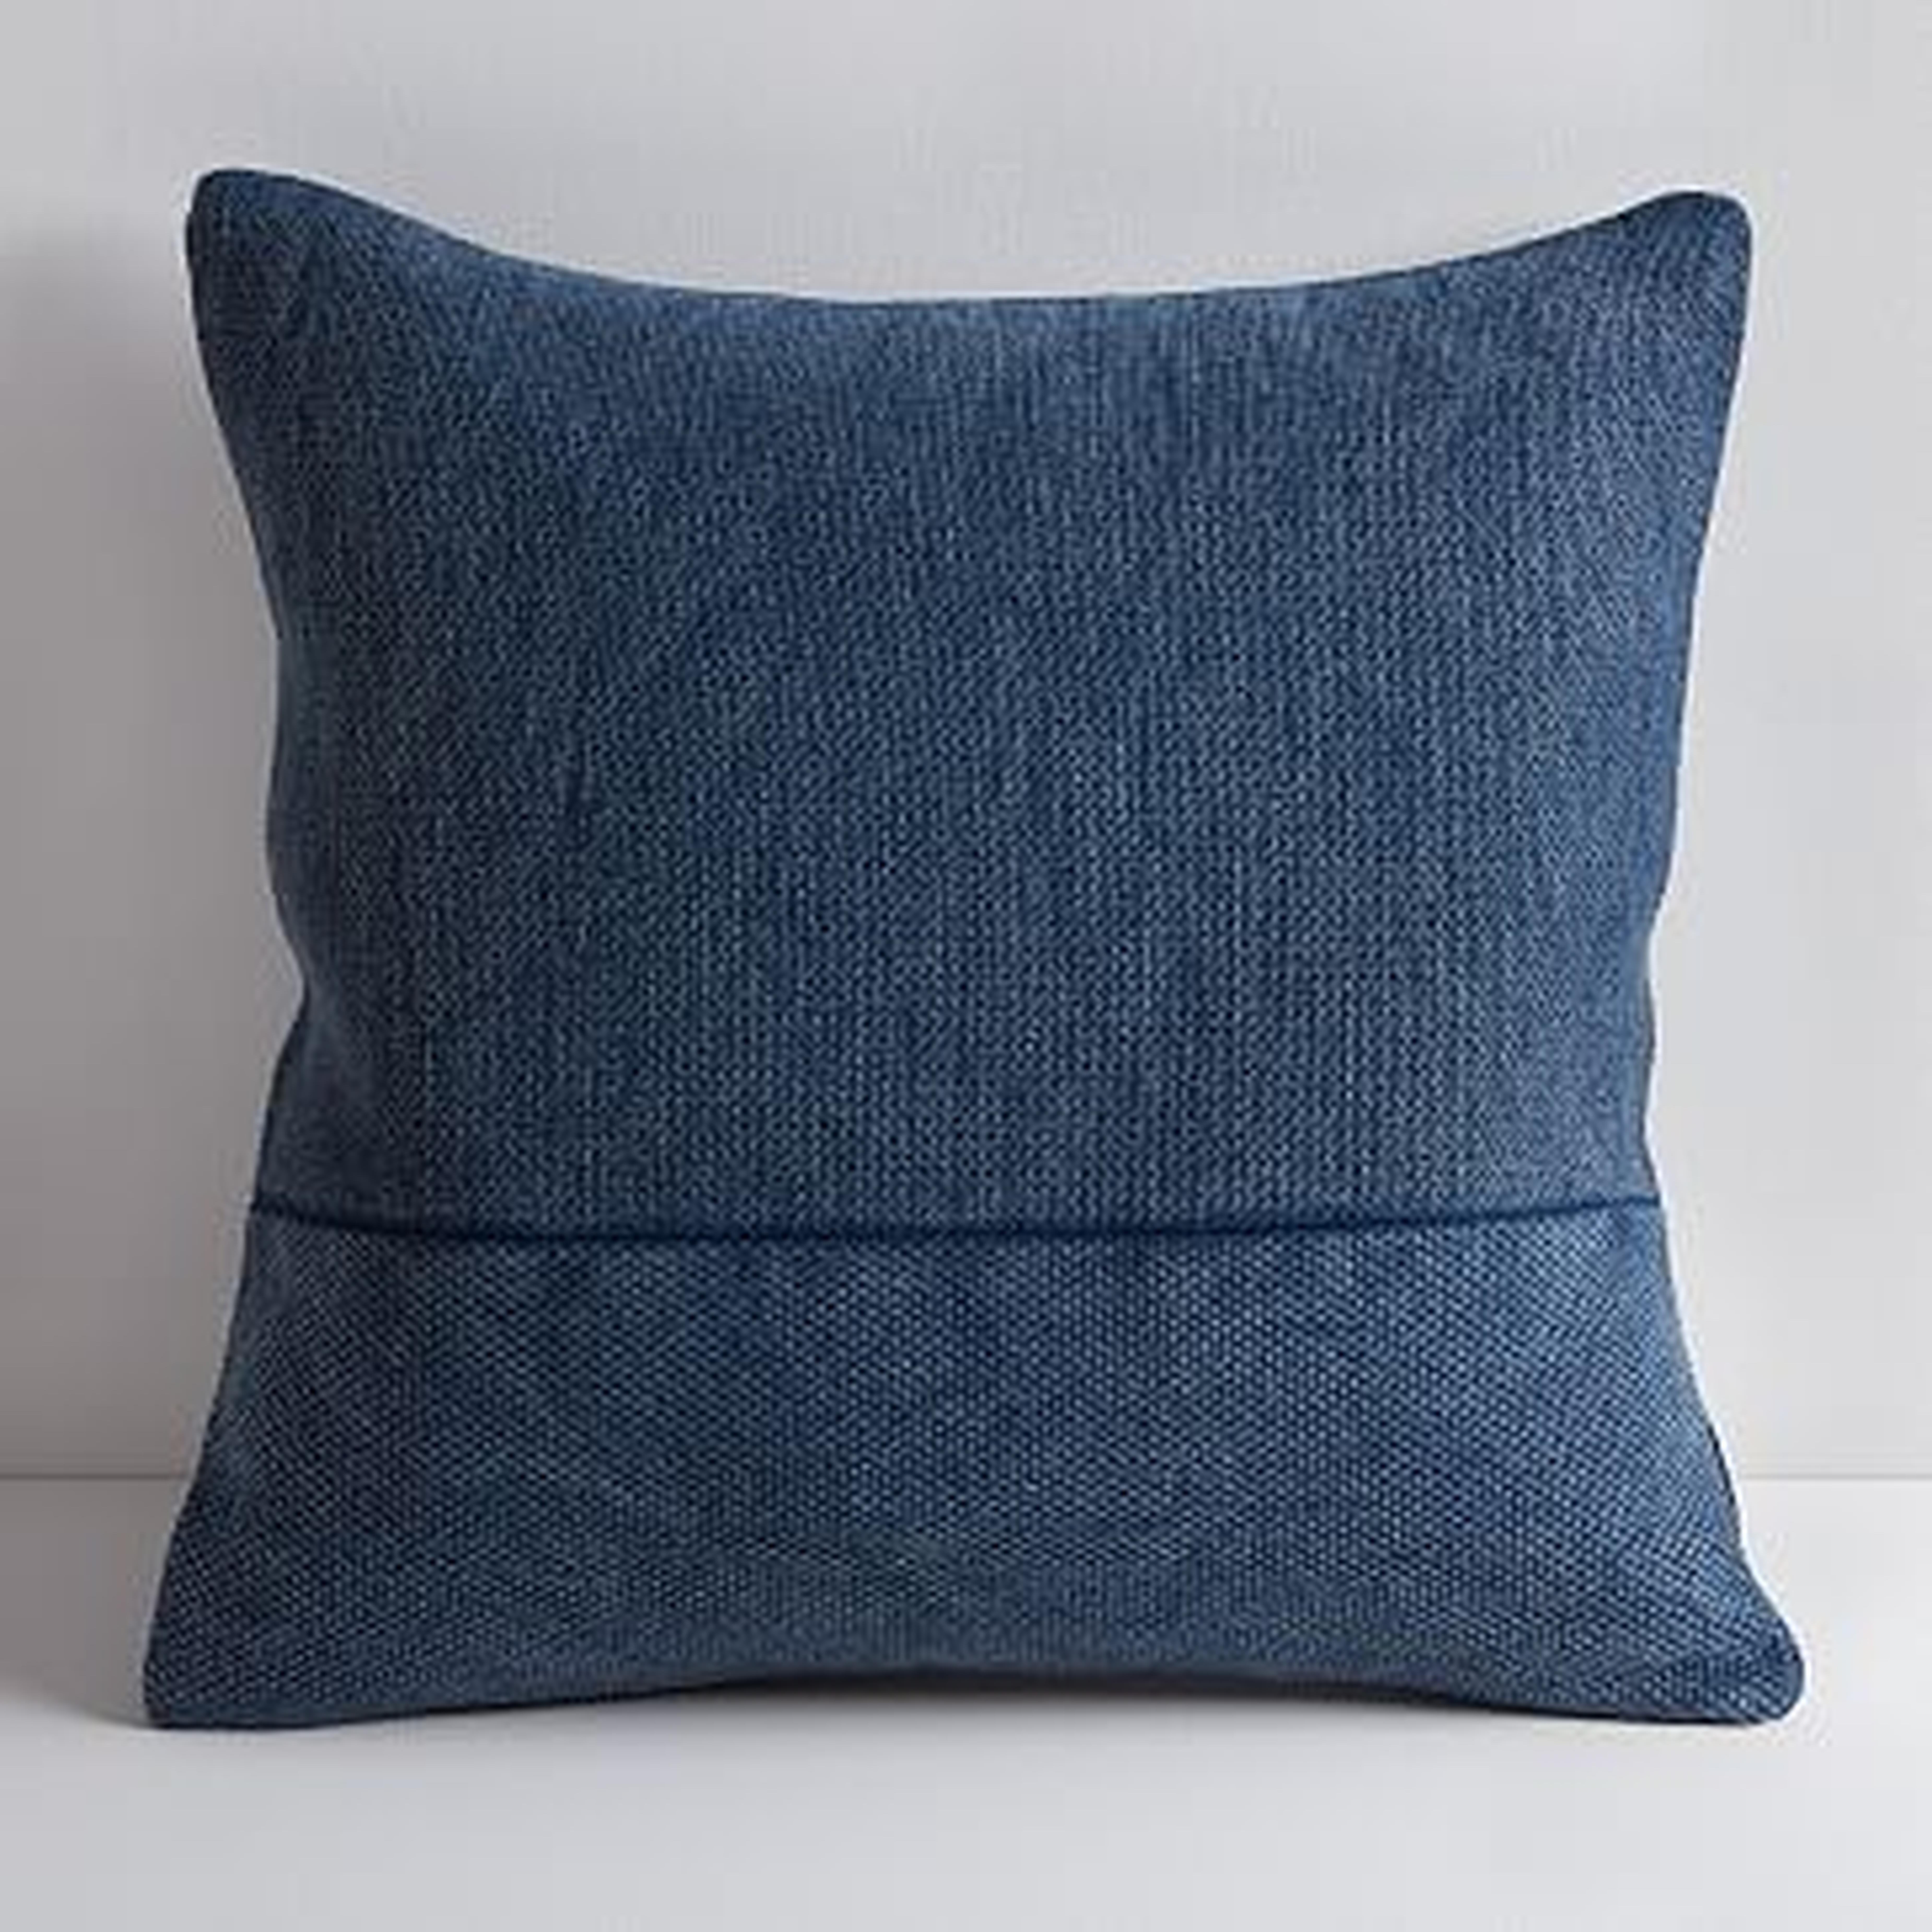 Cotton Canvas Pillow Cover, 18" sq, Midnight - West Elm